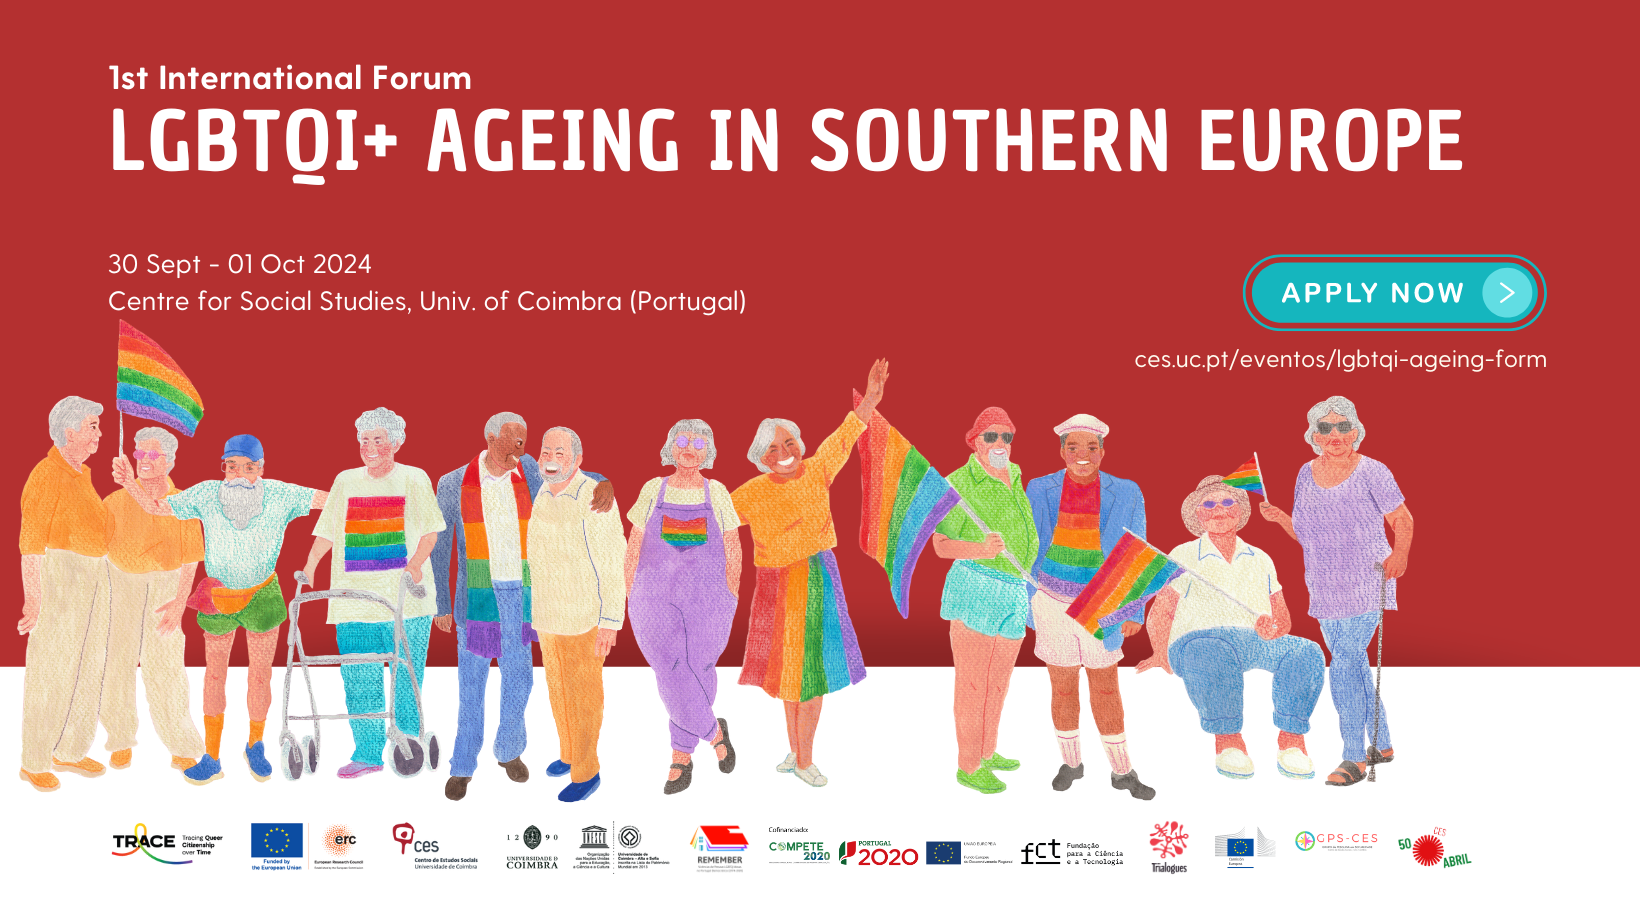 LGBTQI+ Ageing in Southern Europe